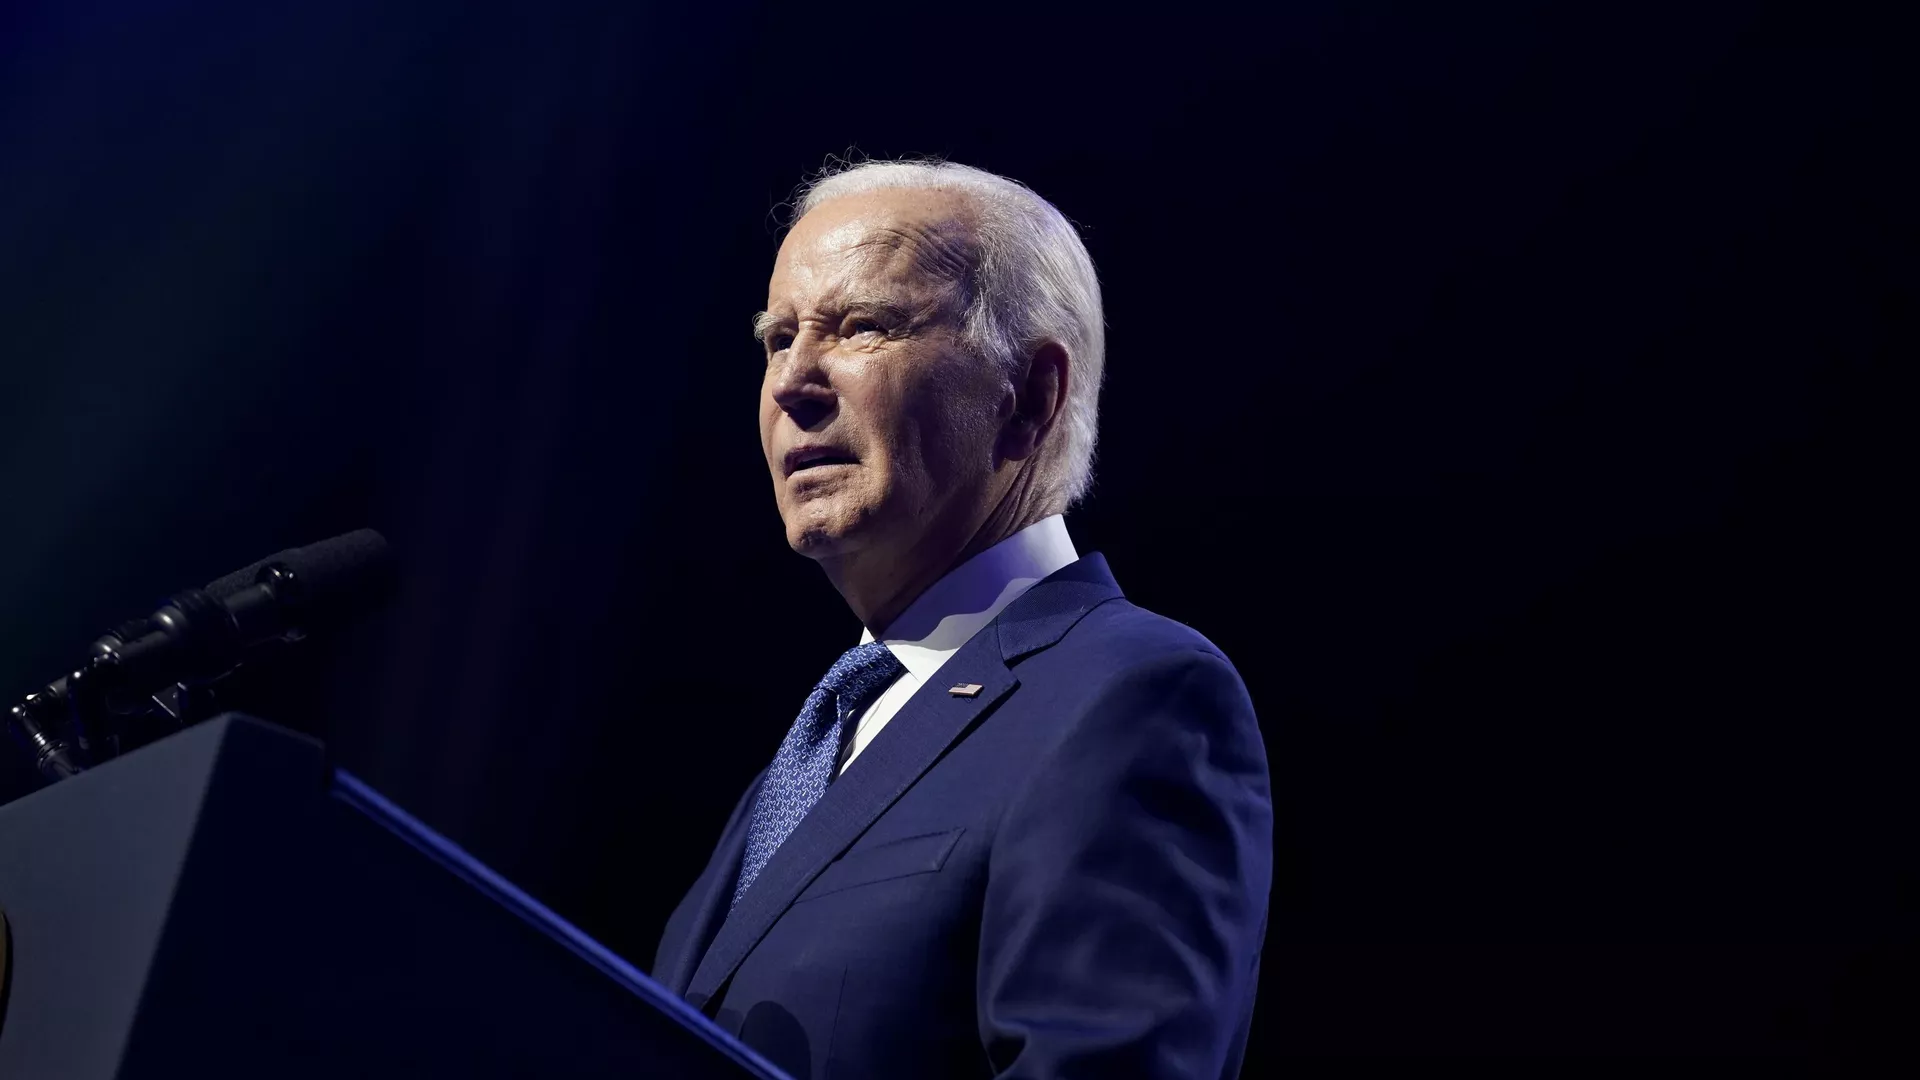 Biden claims Trump ’embraces political violence,’ plays down his poor polling